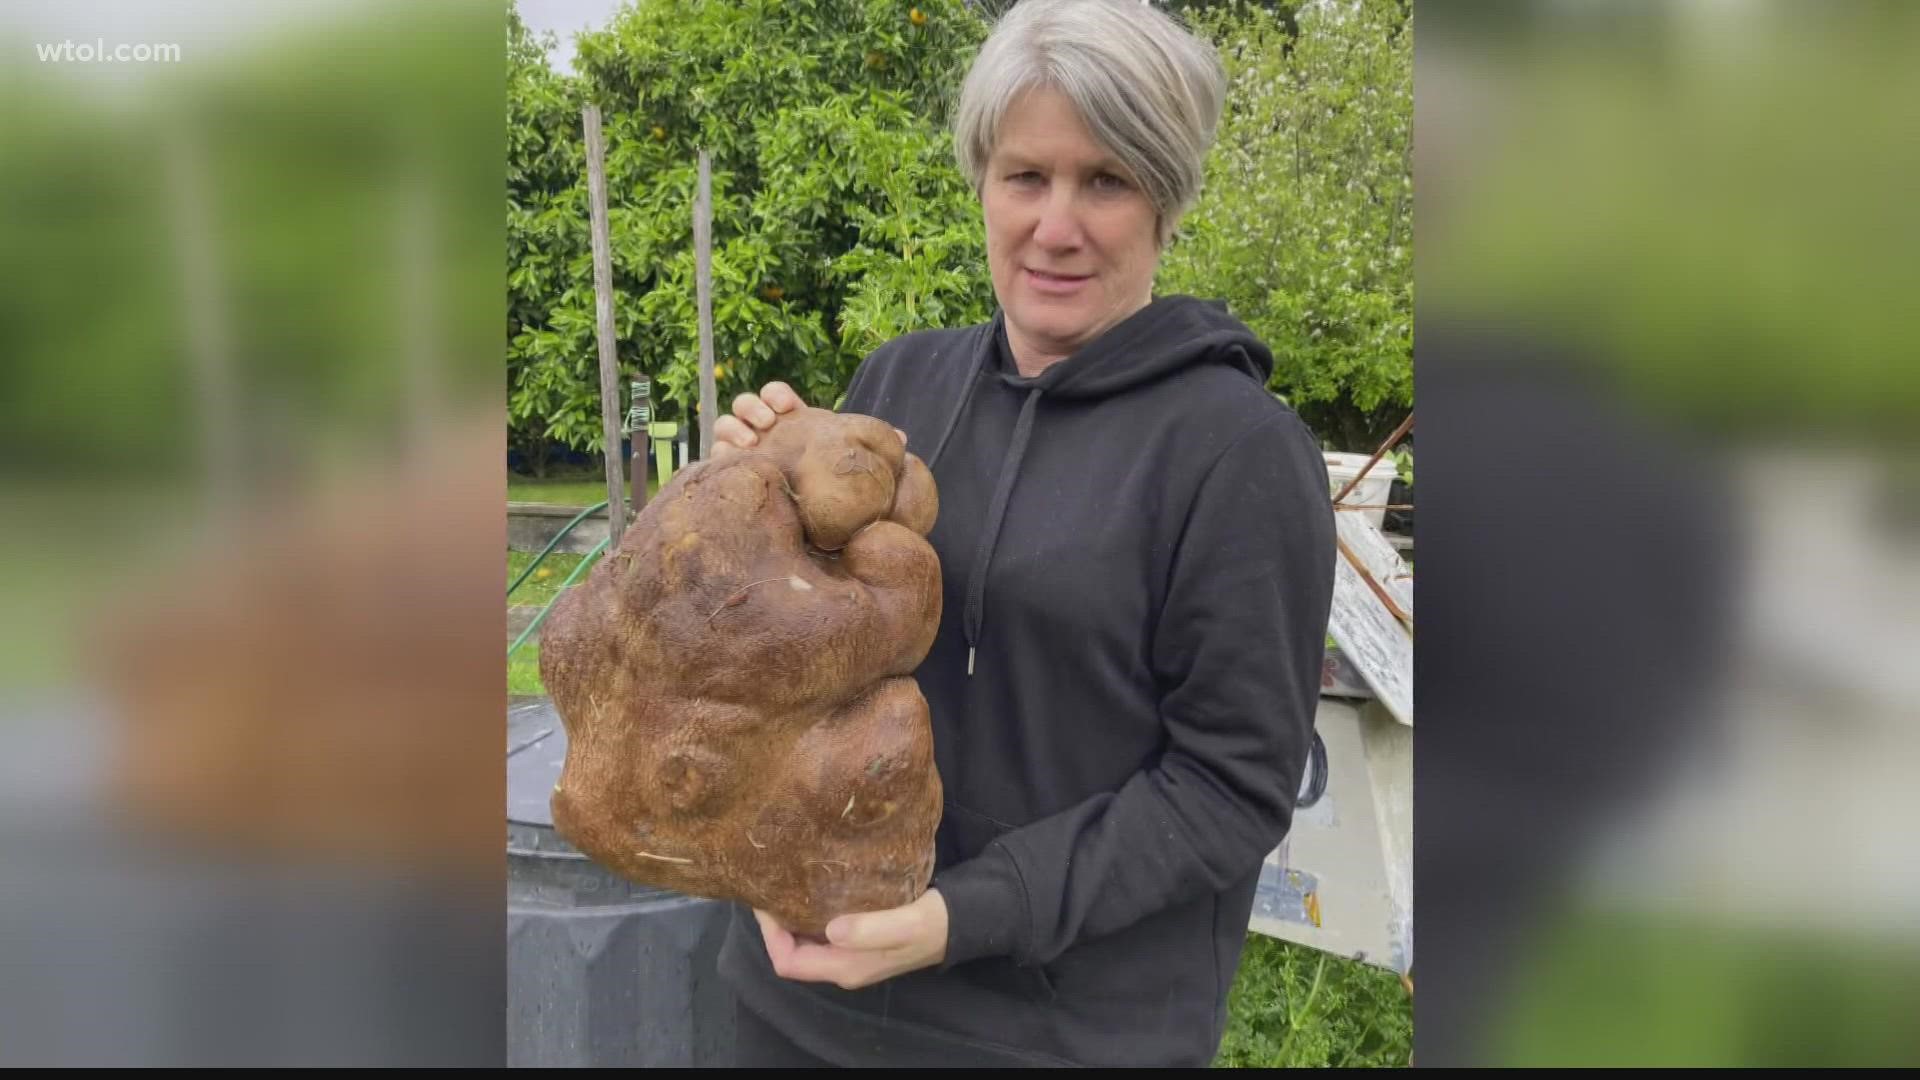 The potato dug up in New Zealand weighs just over 17 pounds.